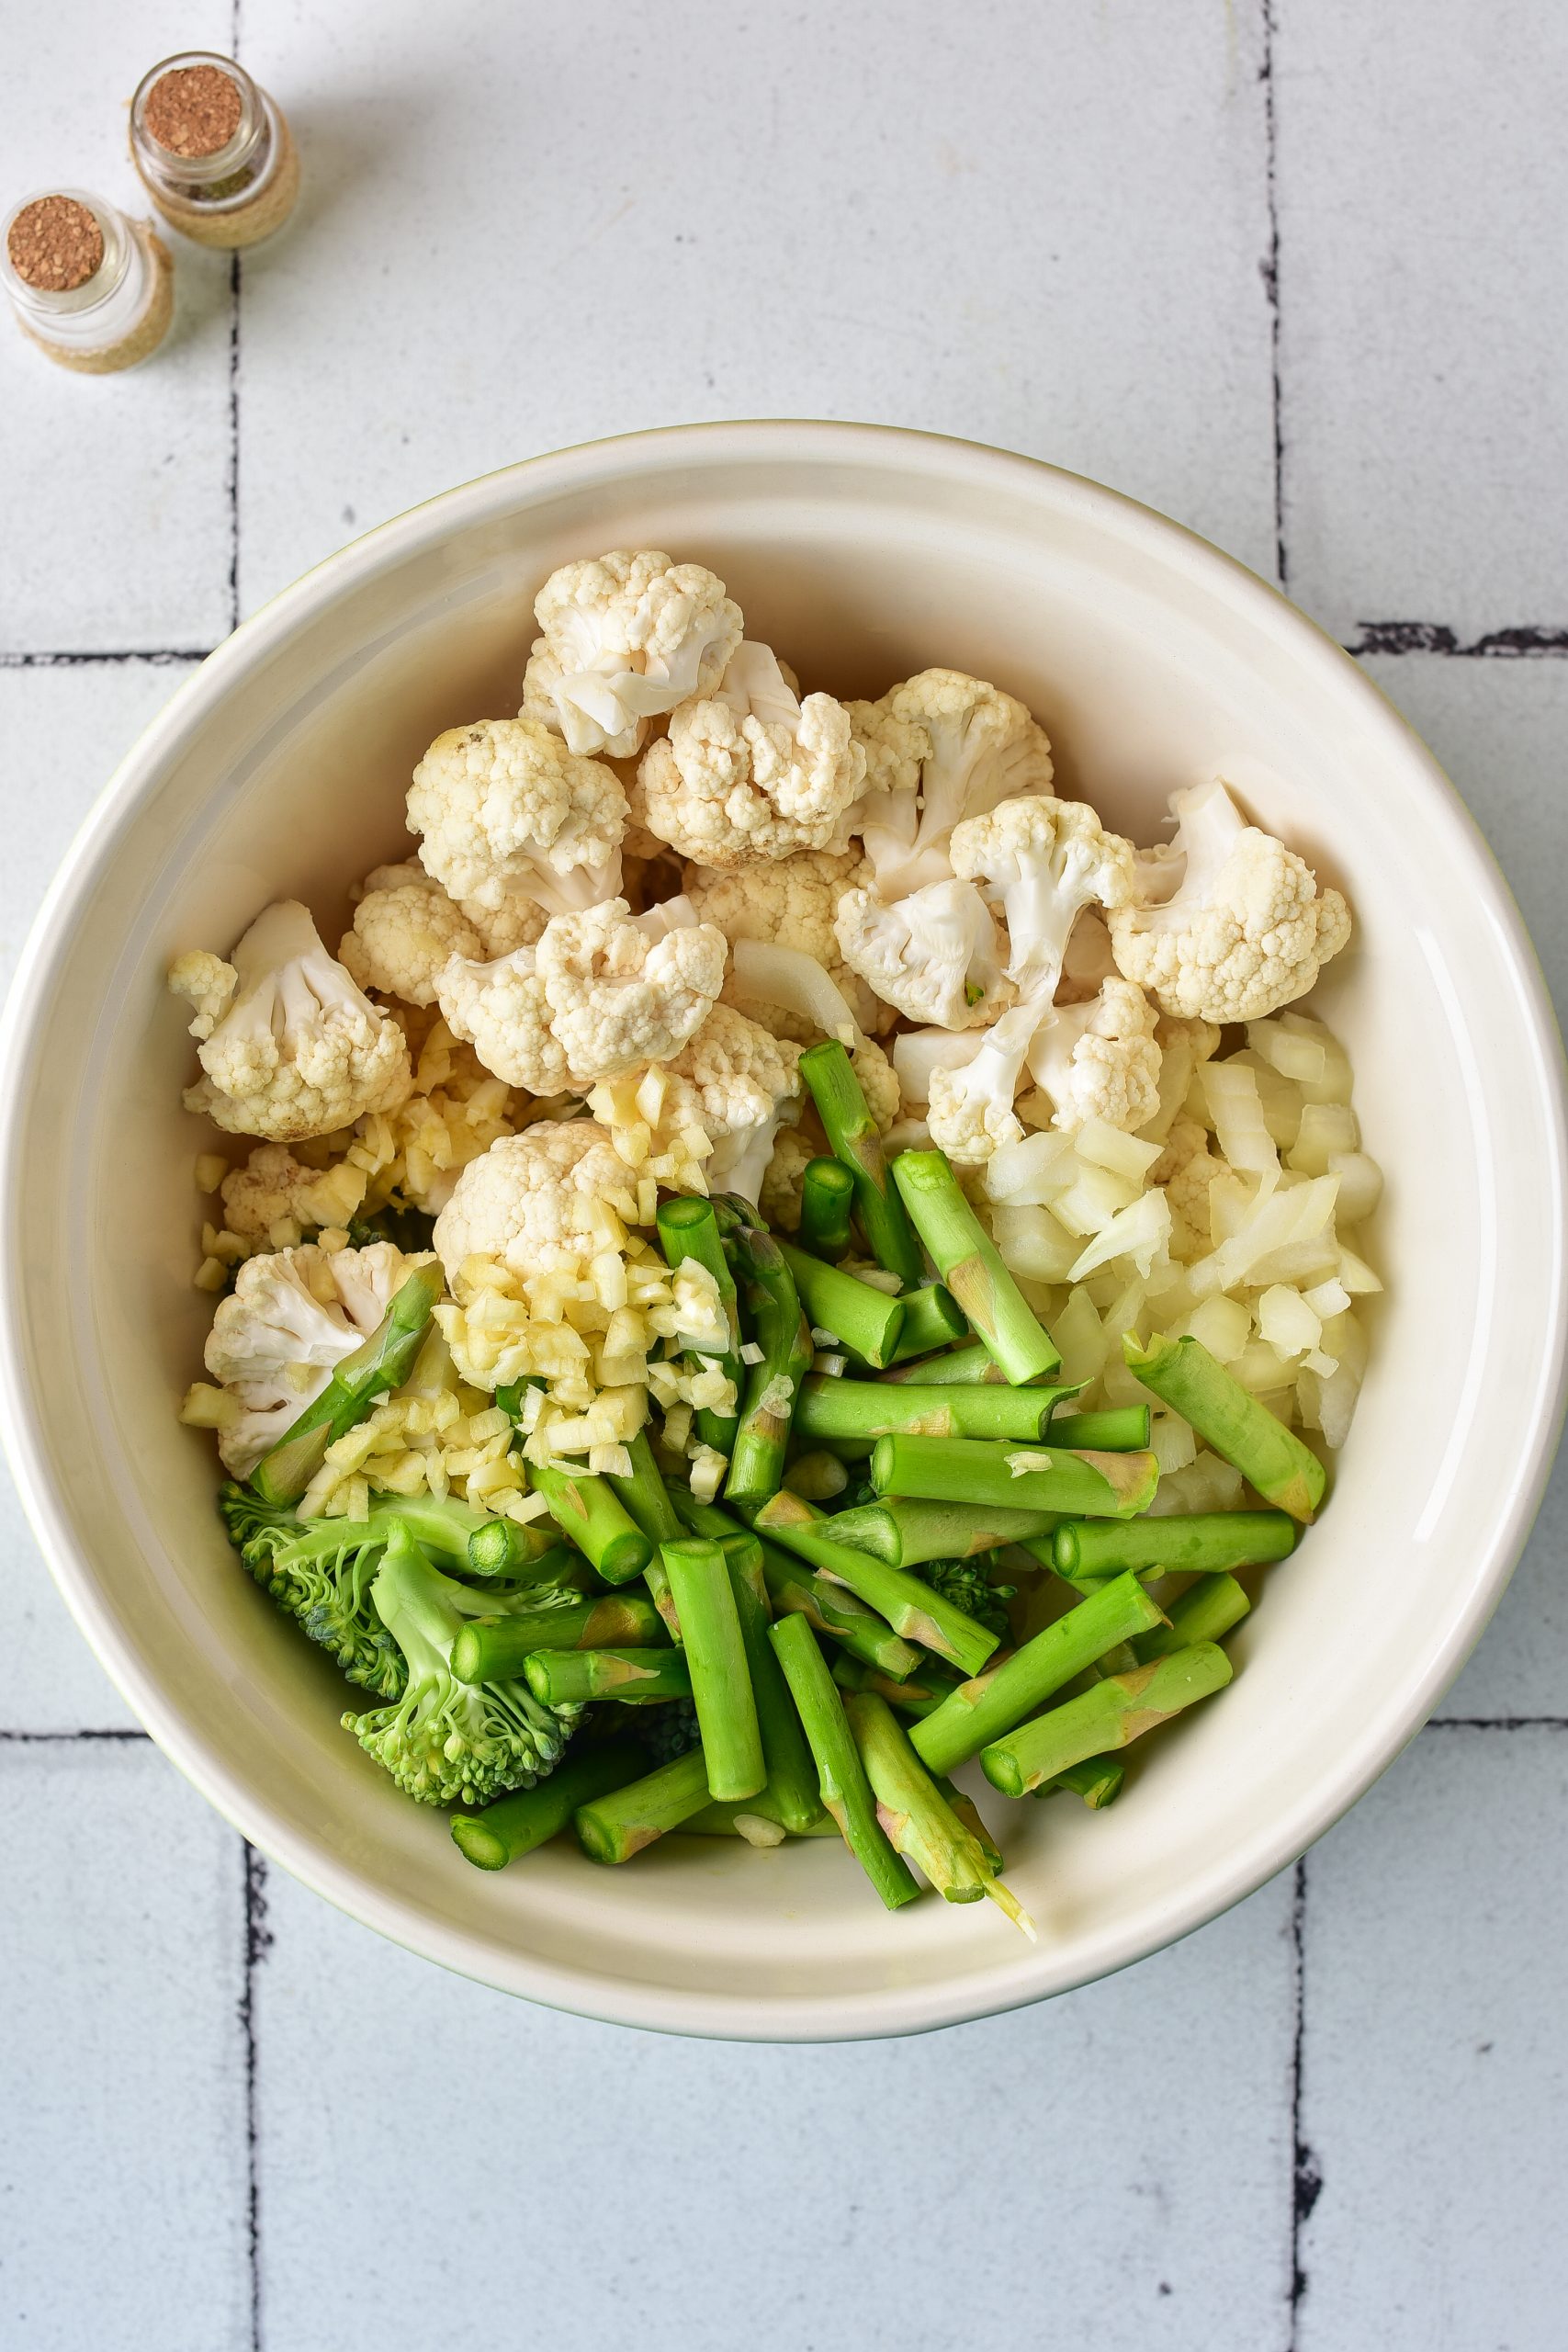 In a bowl, combine the asparagus, cauliflower, broccoli, and onion. 